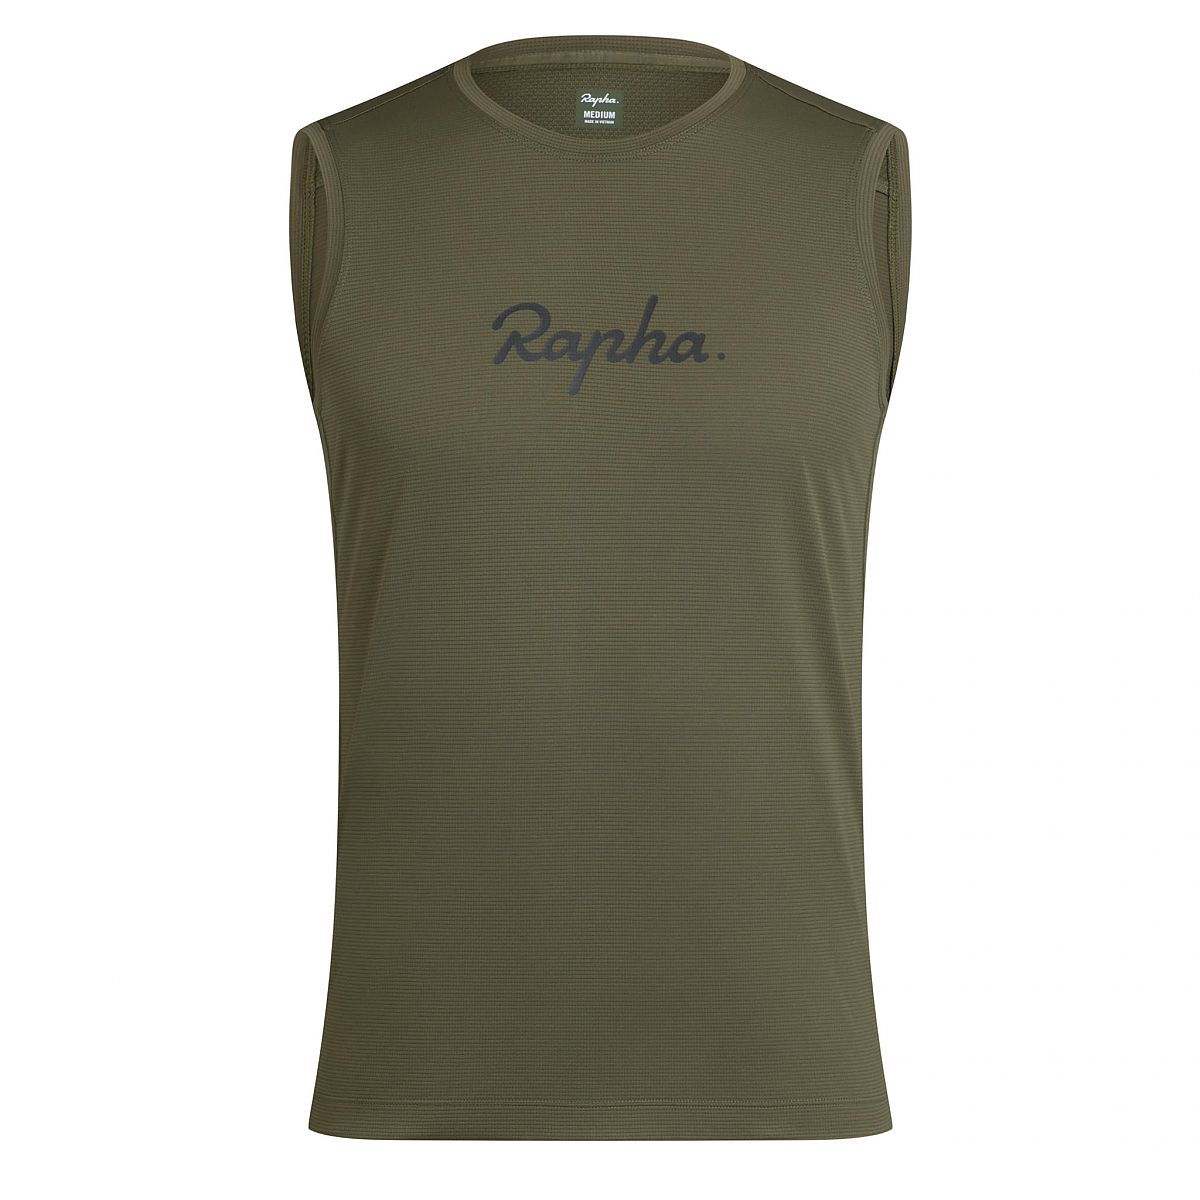 Rapha unveils indoor training collection of apparel and accessories ...